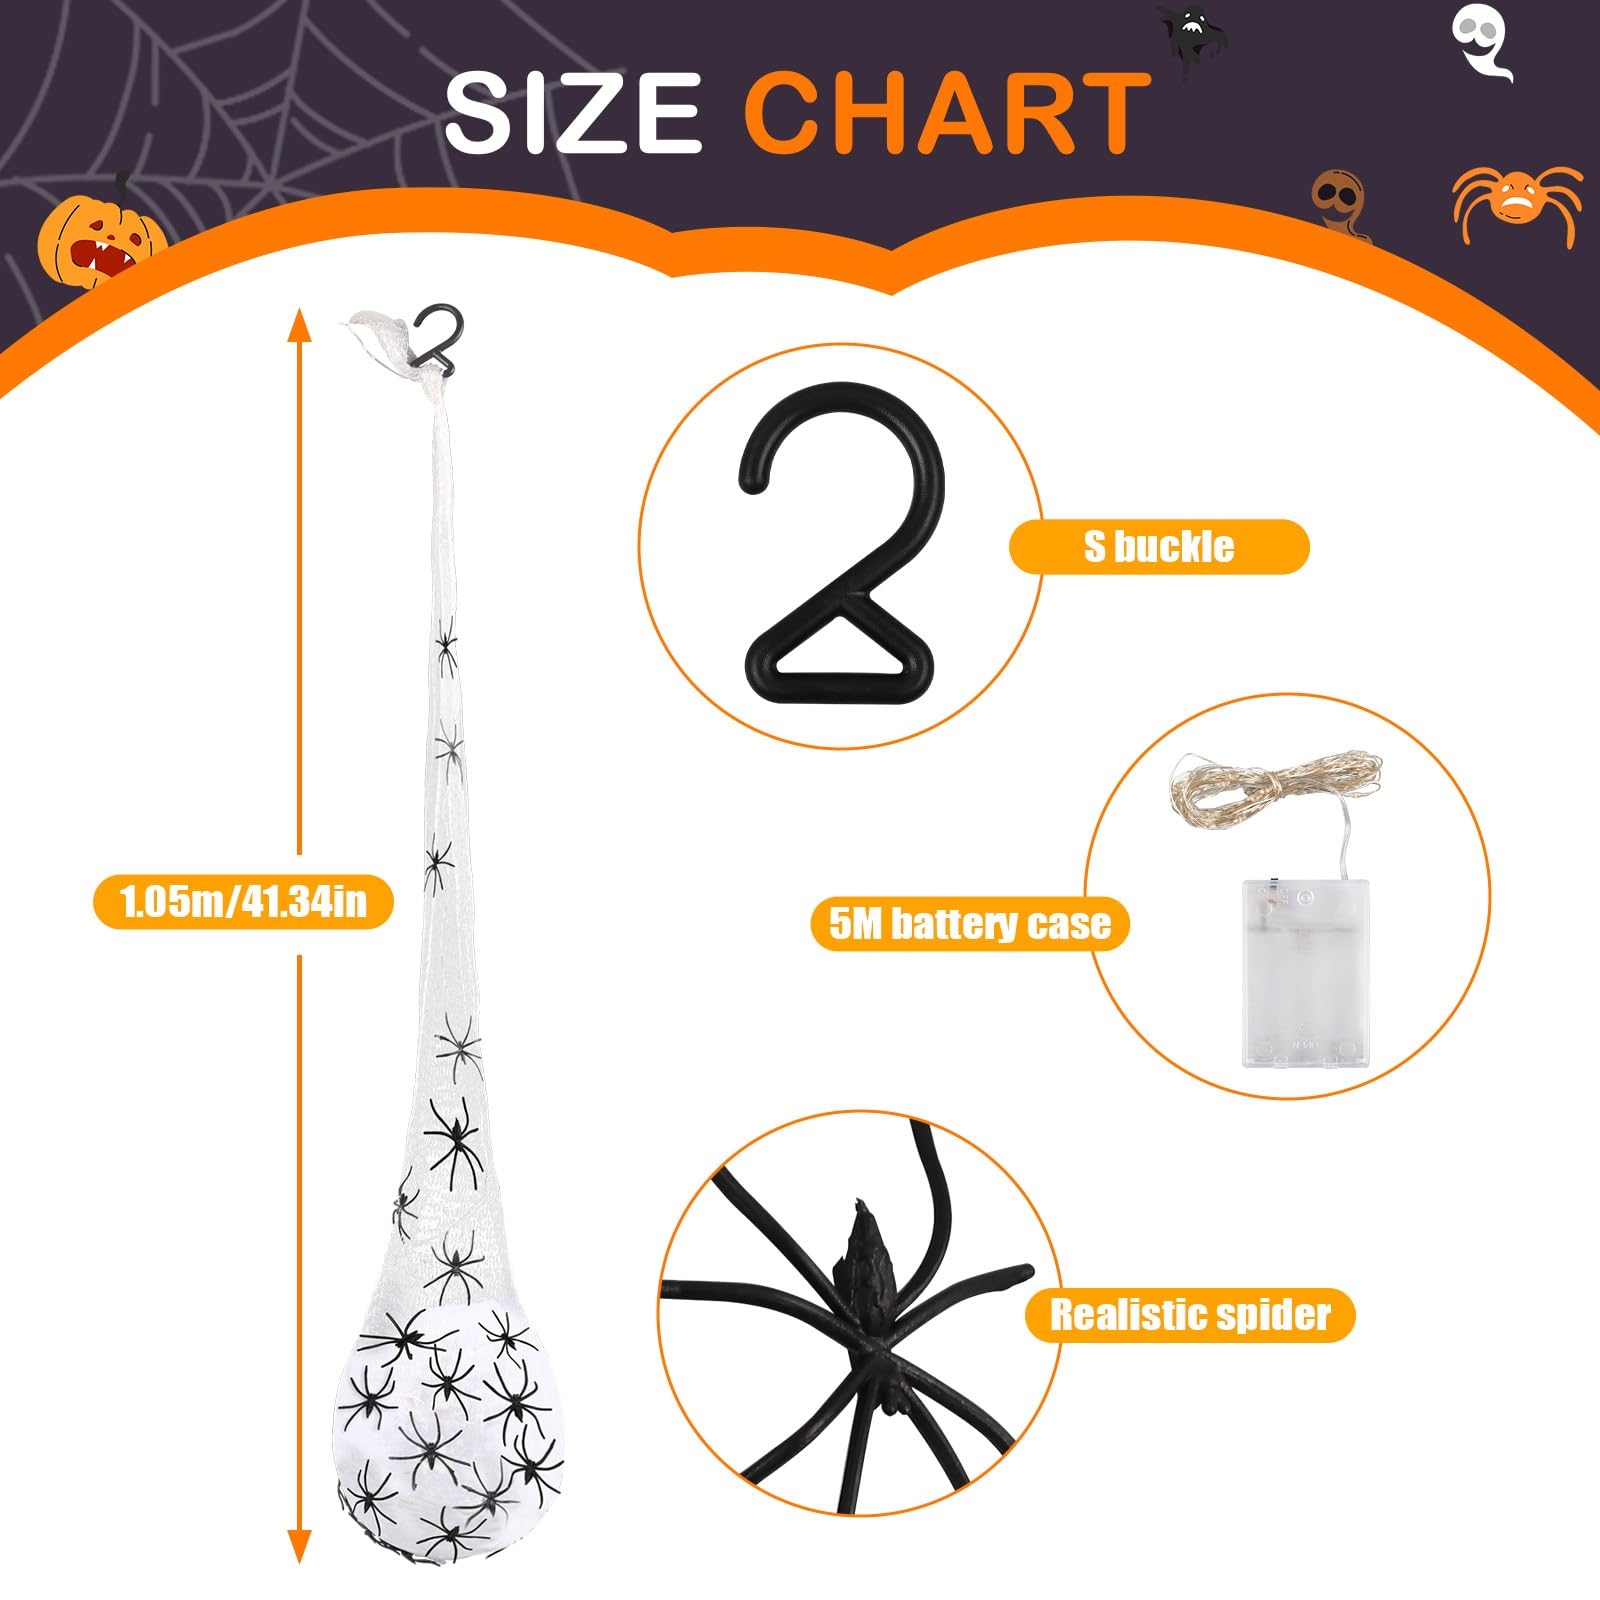 Contents and size chart